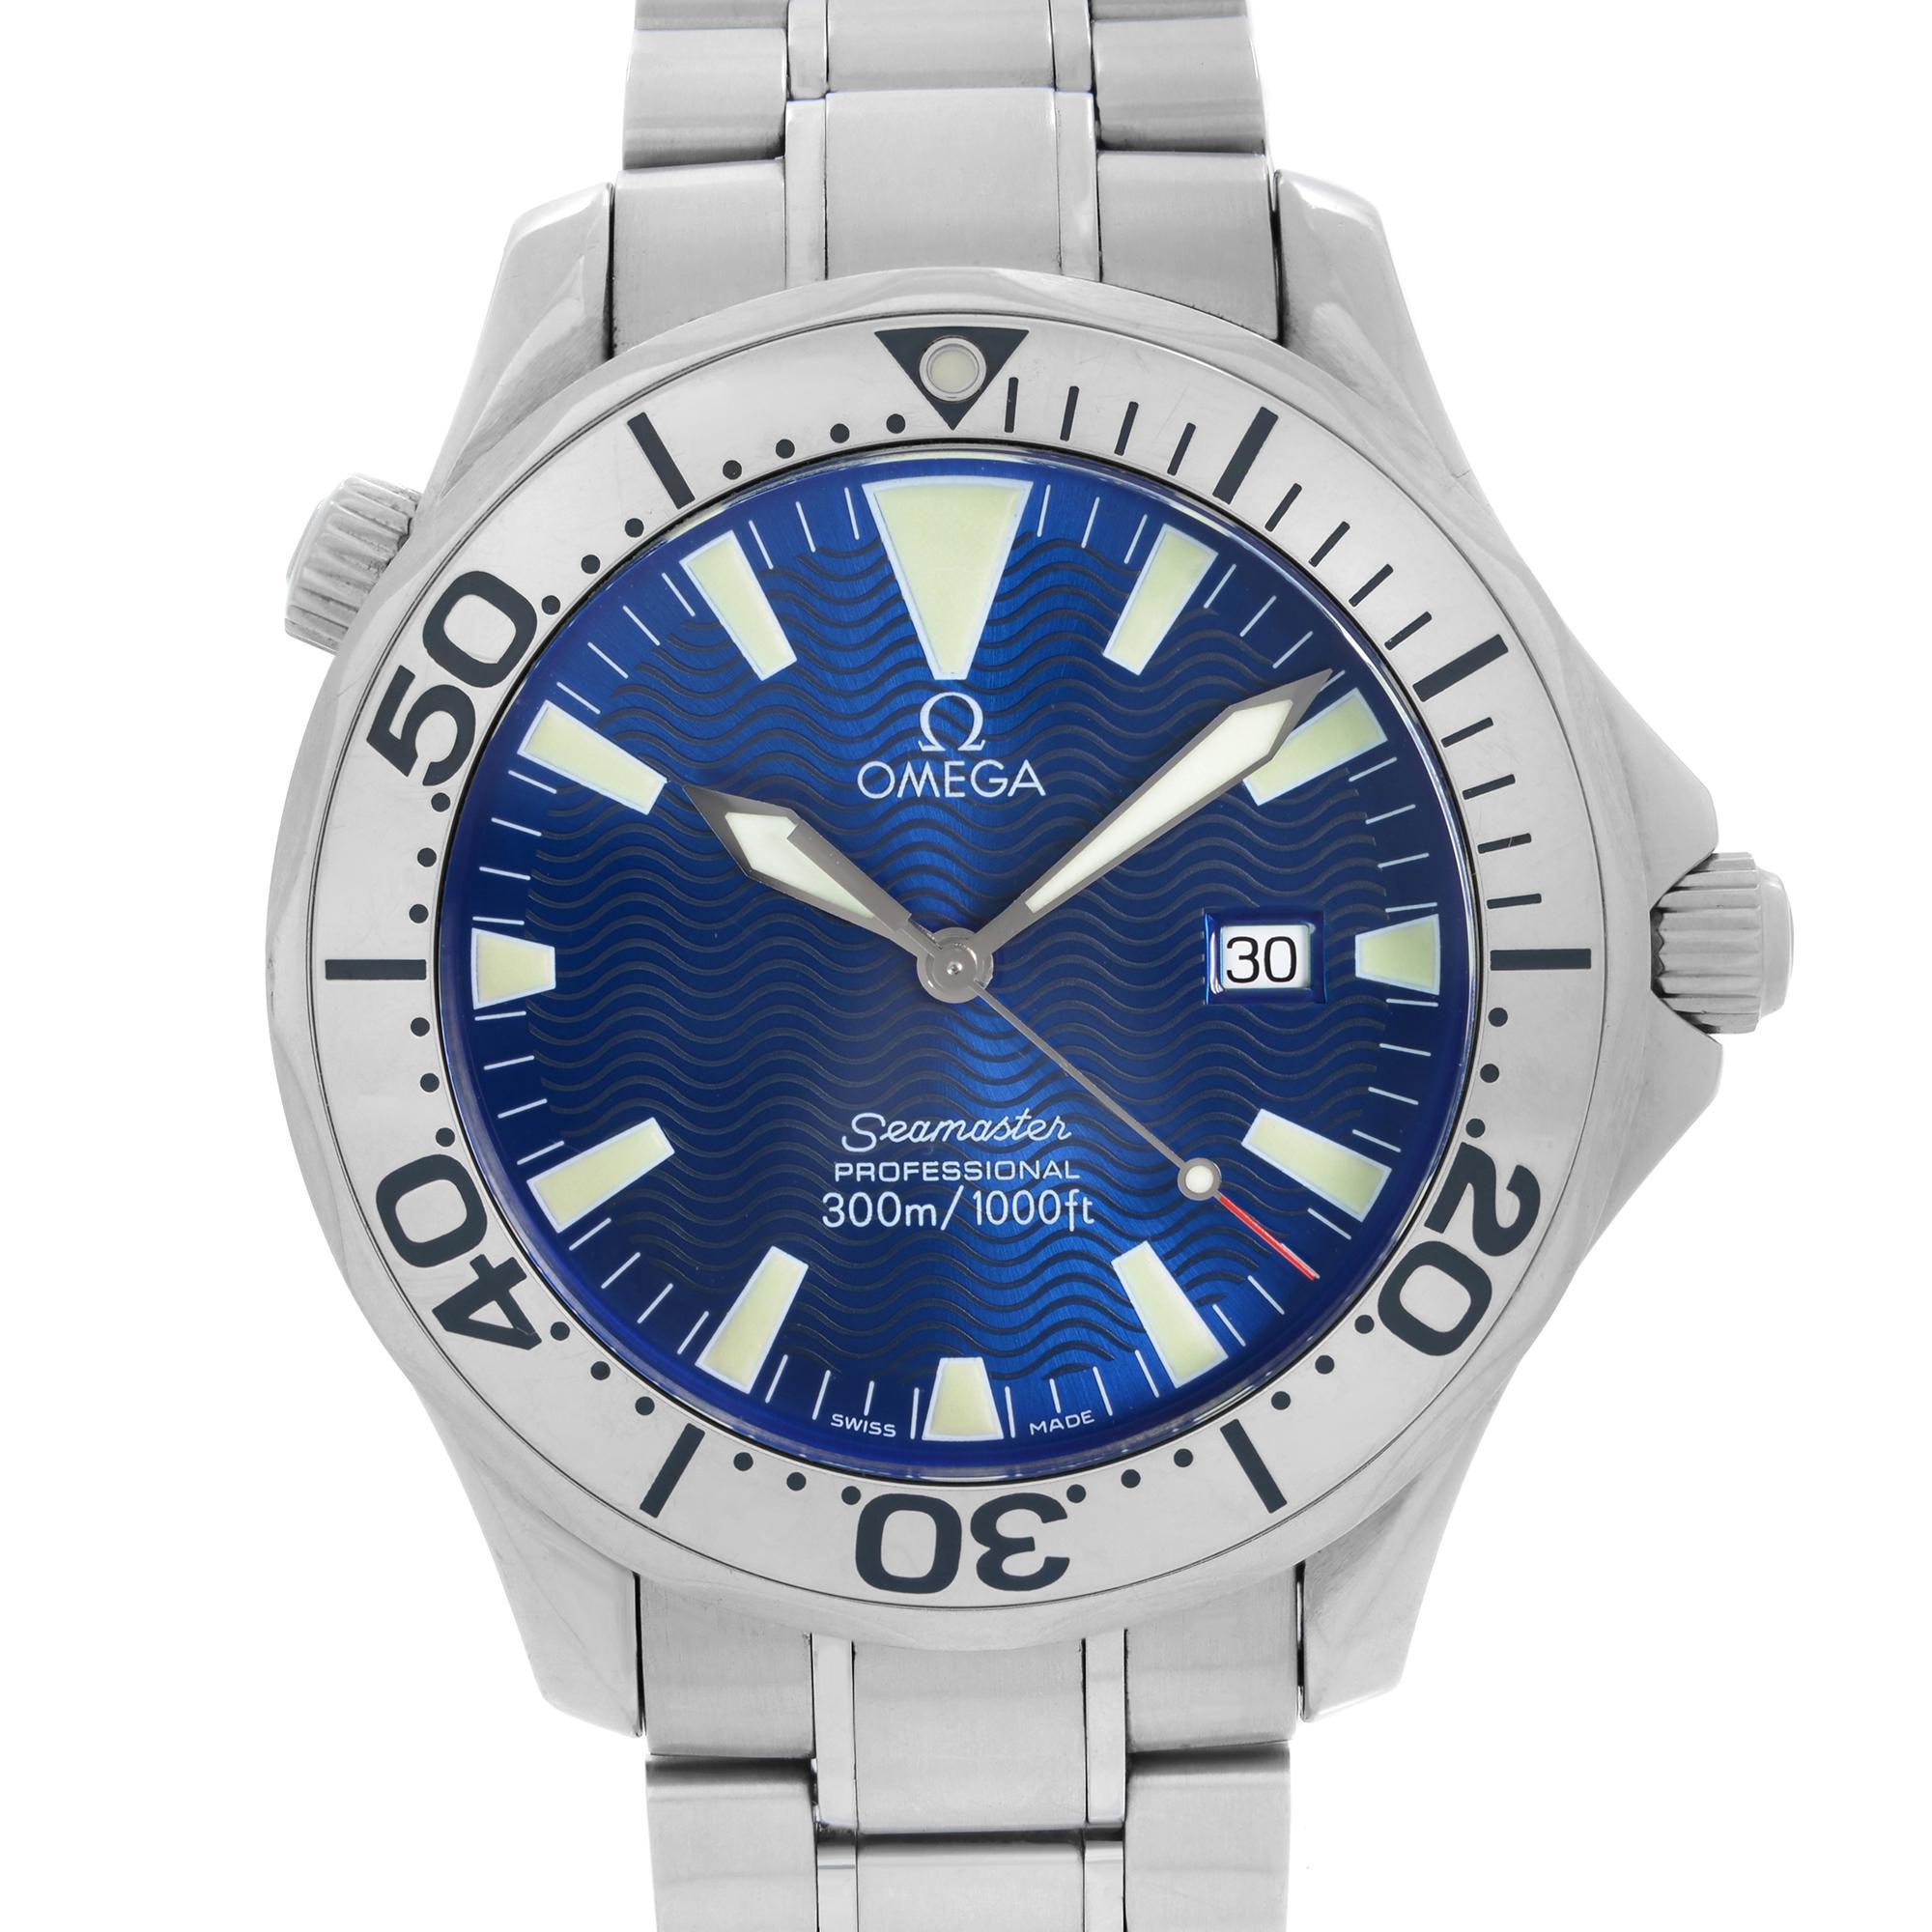 Pre-owned Omega Seamaster Diver 300M 41mm Quartz Watch 2253.80.00. This Beautiful Timepiece is Powered By a Quartz Movement and Features: Stainless Steel Case and Bracelet, Unidirectional Stainless Steel Bezel, Blue Dial with Luminous Silver-Tone